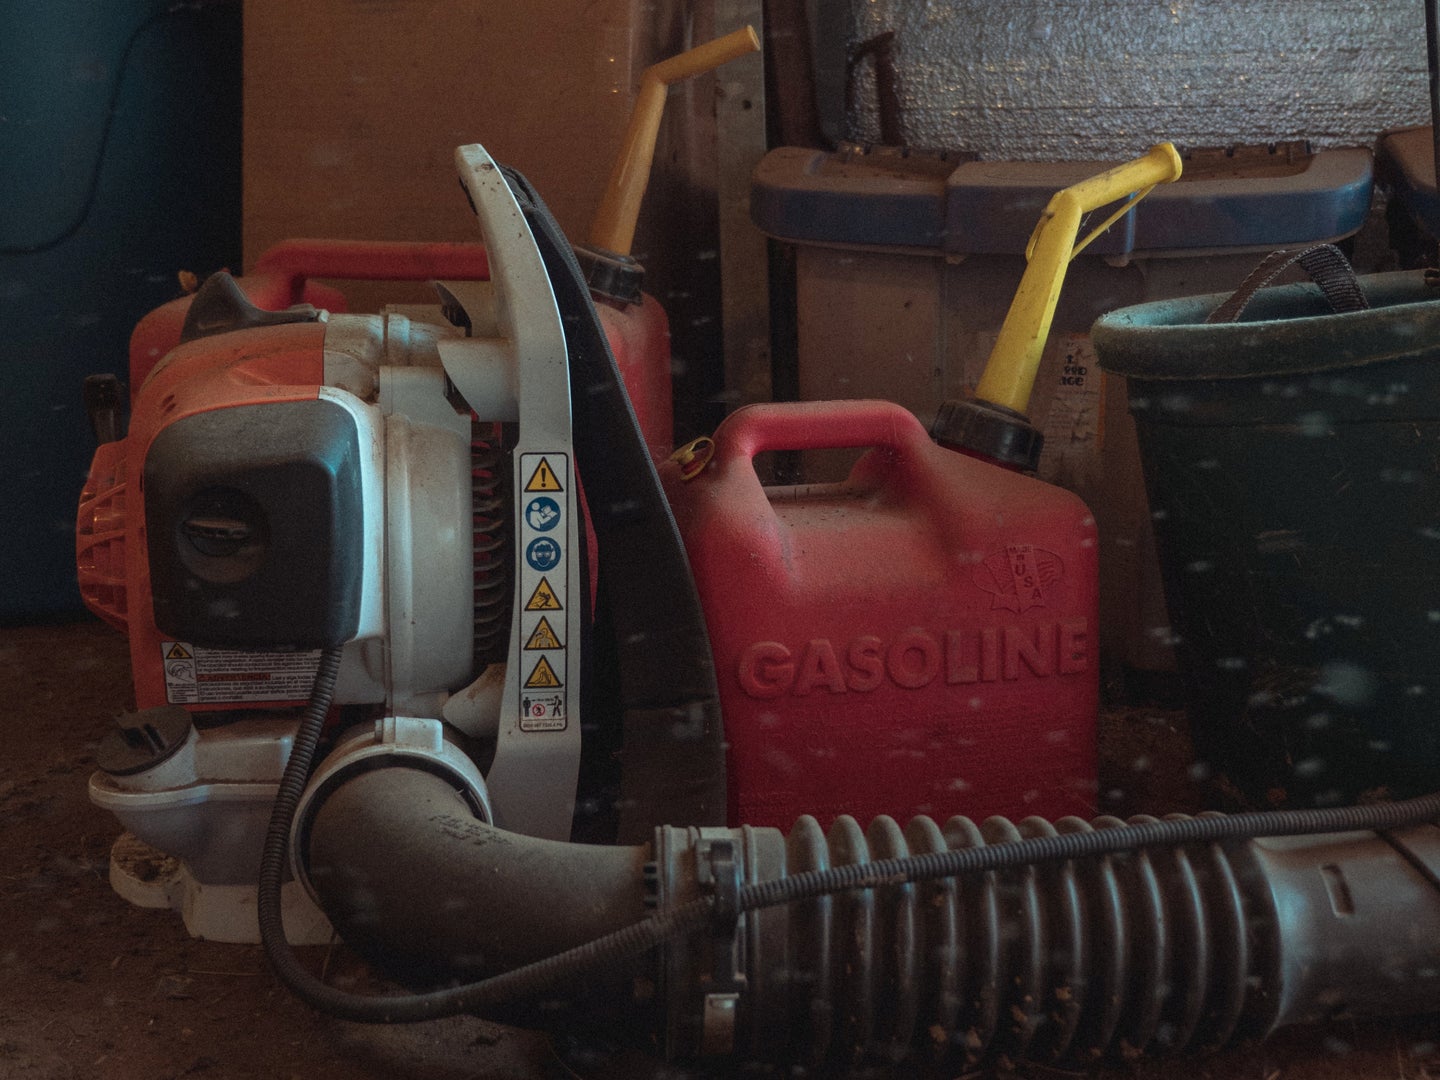 A red gasoline can in a garage or shed next to a large gas-powered leafblower.